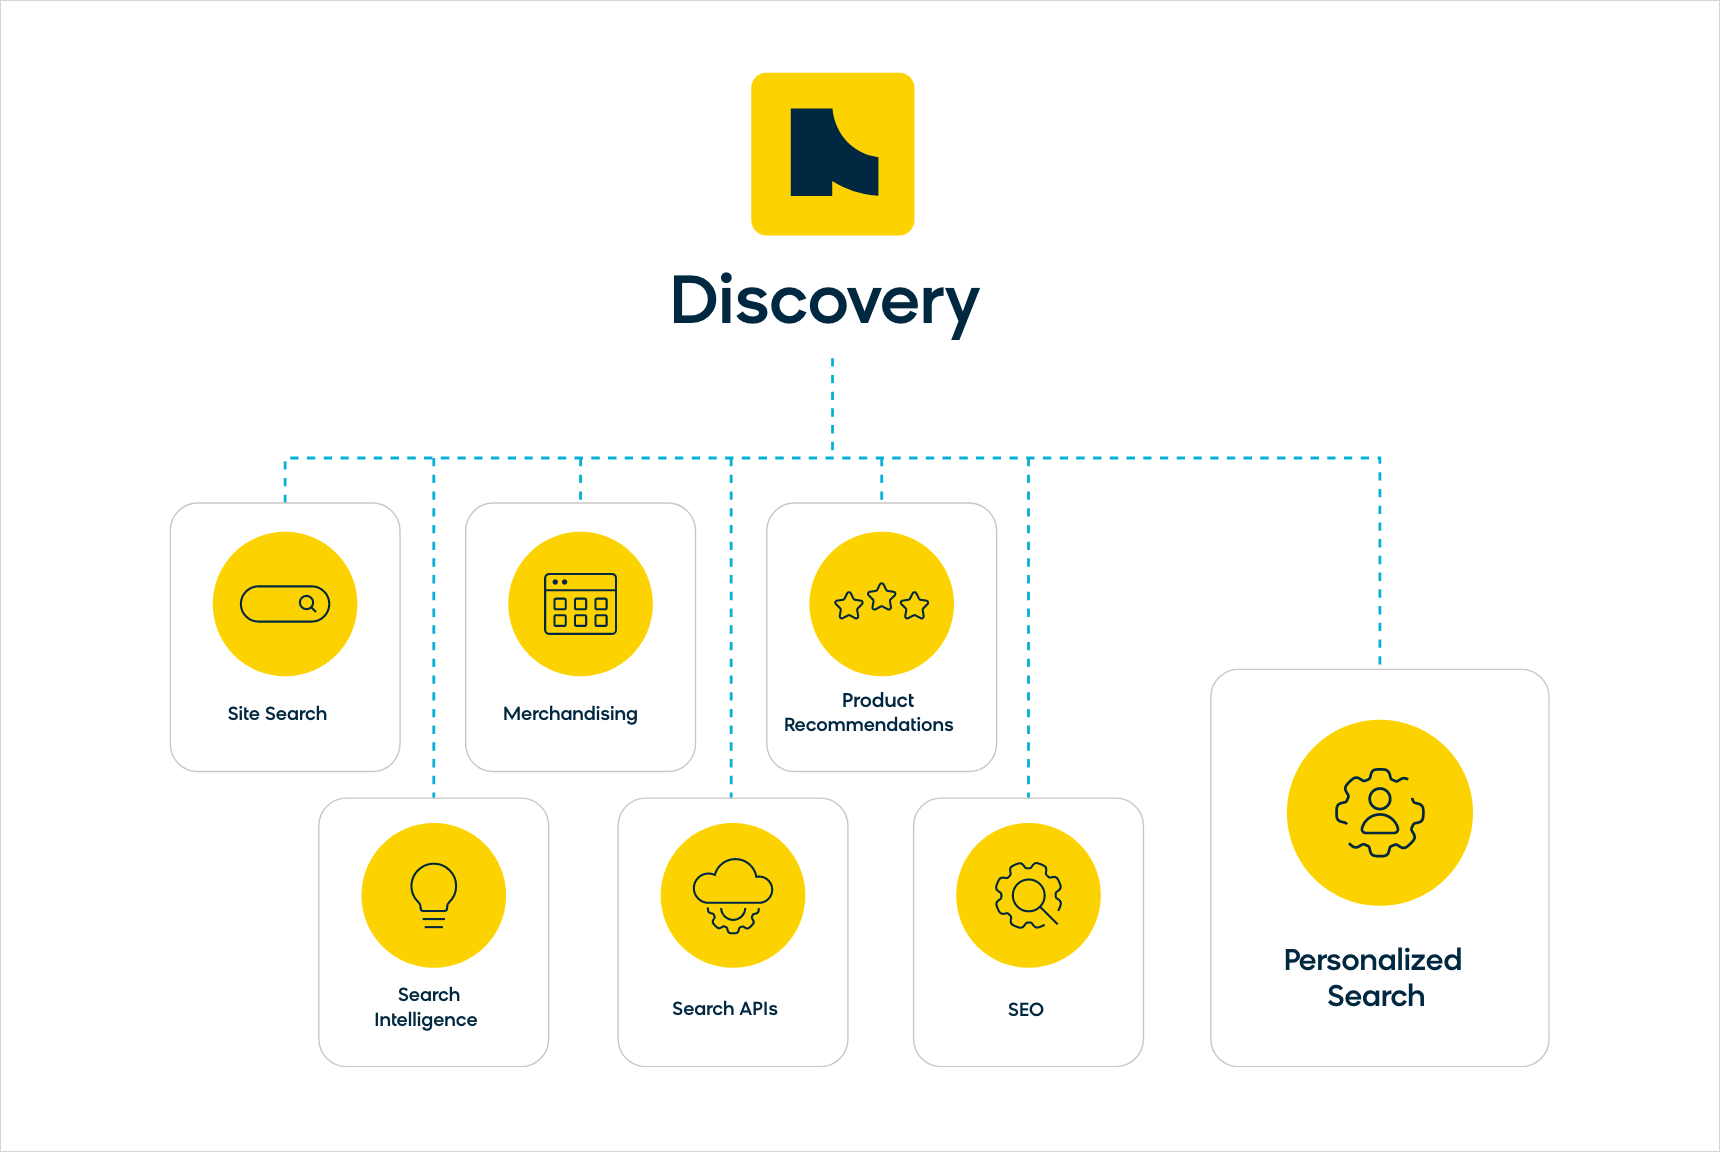 Diagram of Bloomreach Discovery Modules with Personalized Search